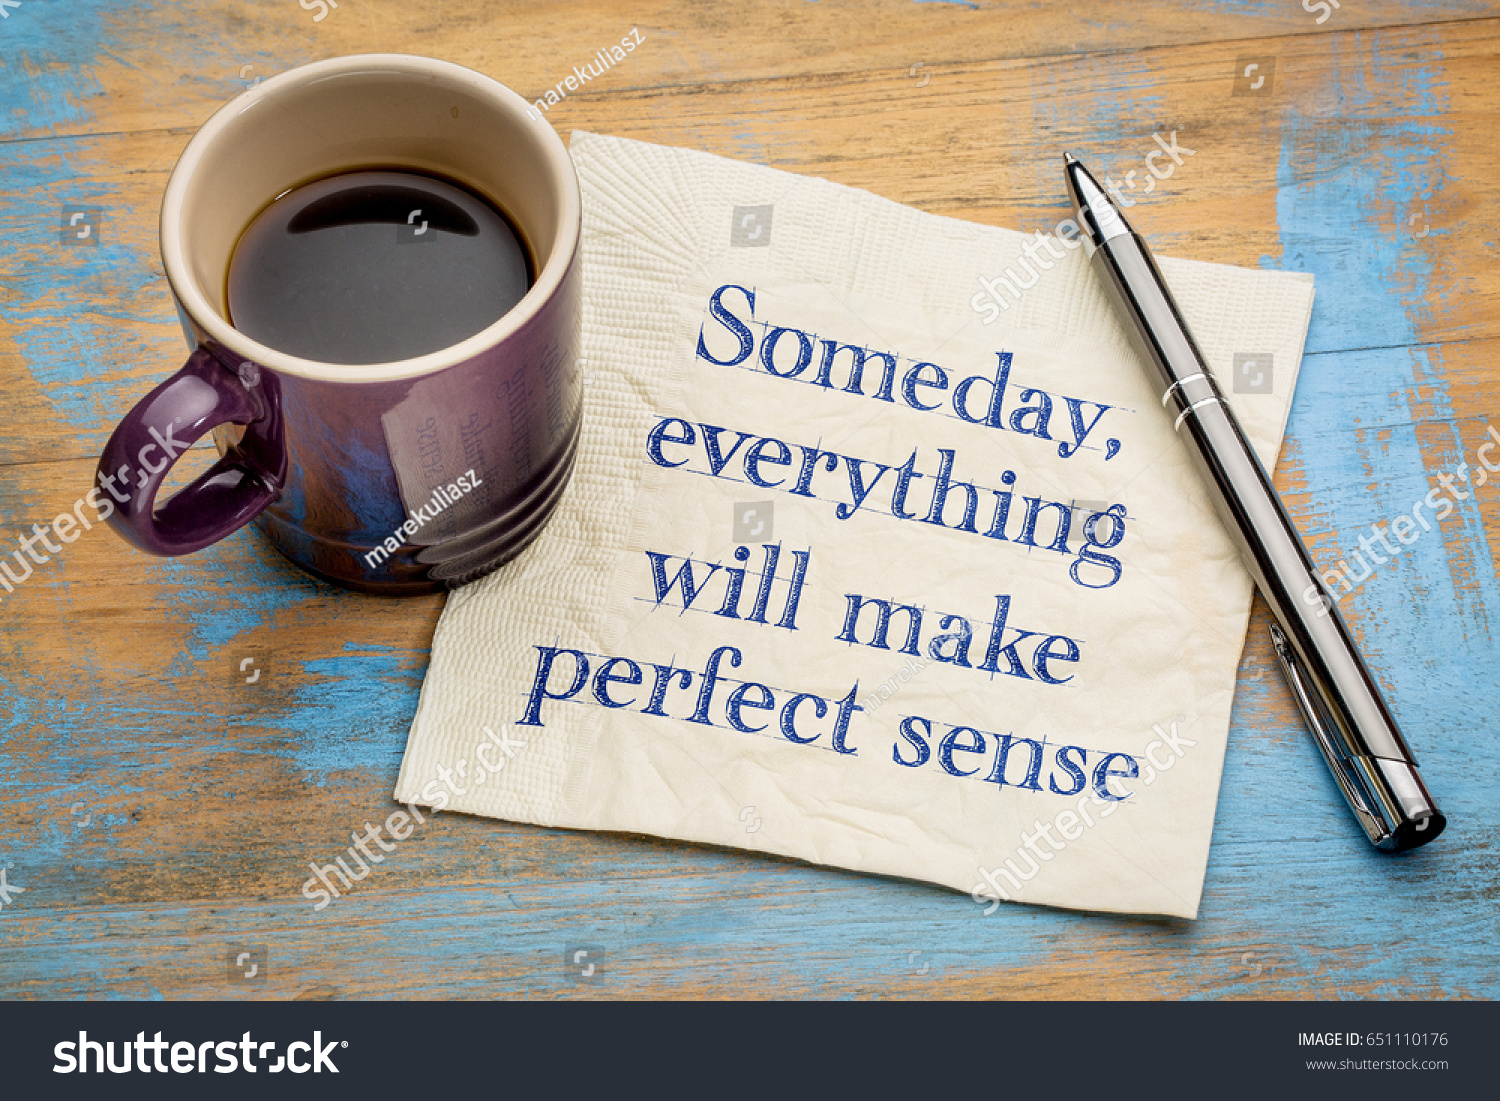 Someday, everything will make perfect sense - handwriting on a napkin with a cup of espresso coffee #651110176